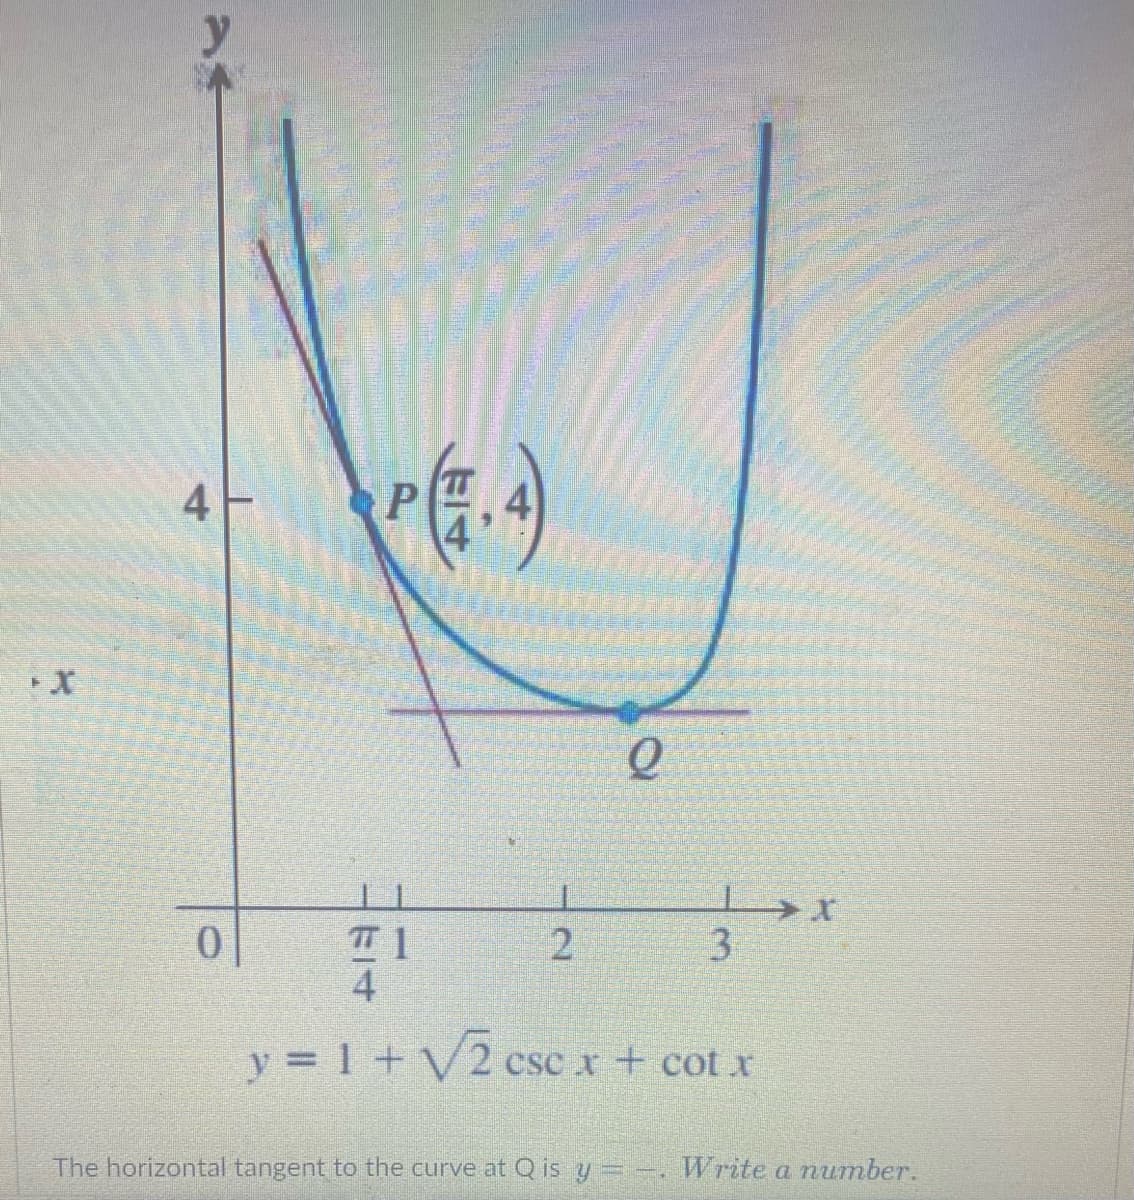 4
TT 1
4.
3
y = 1 +V2 csc x+ cot x
The horizontal tangent to the curve at Q is y =-. Write a number.
2.
P.
